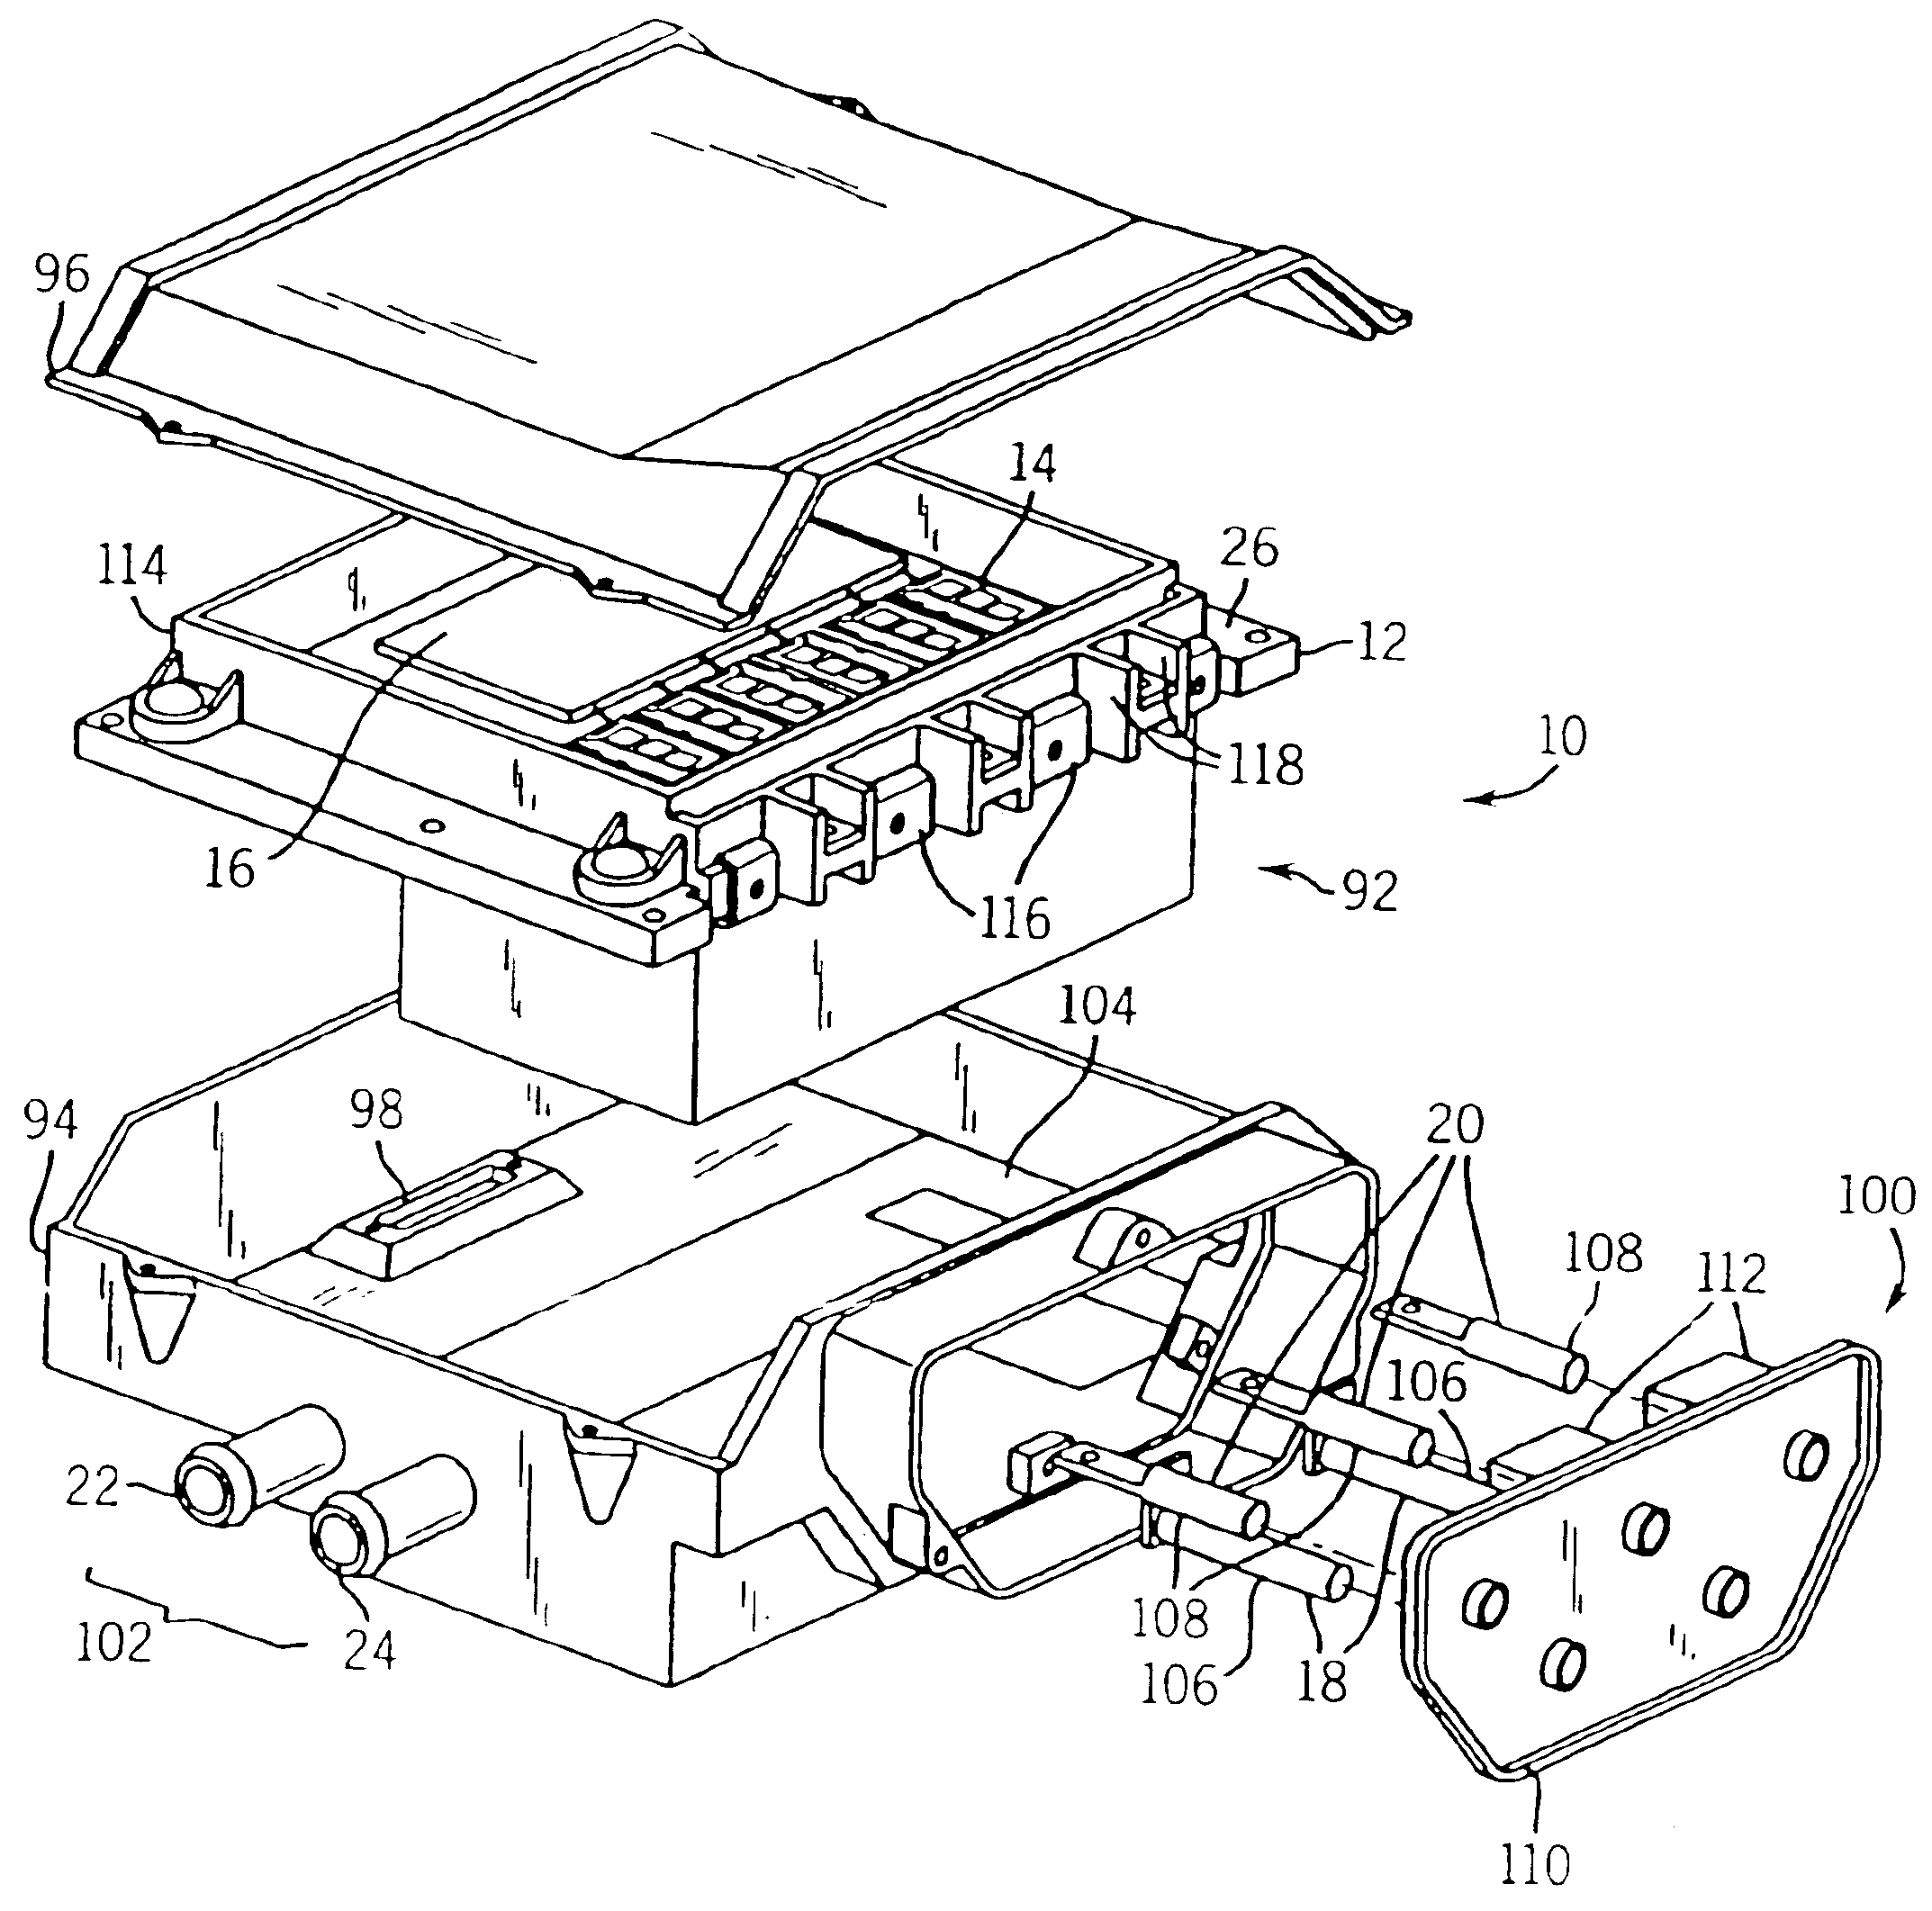 Compact vehicle drive module having improved thermal control